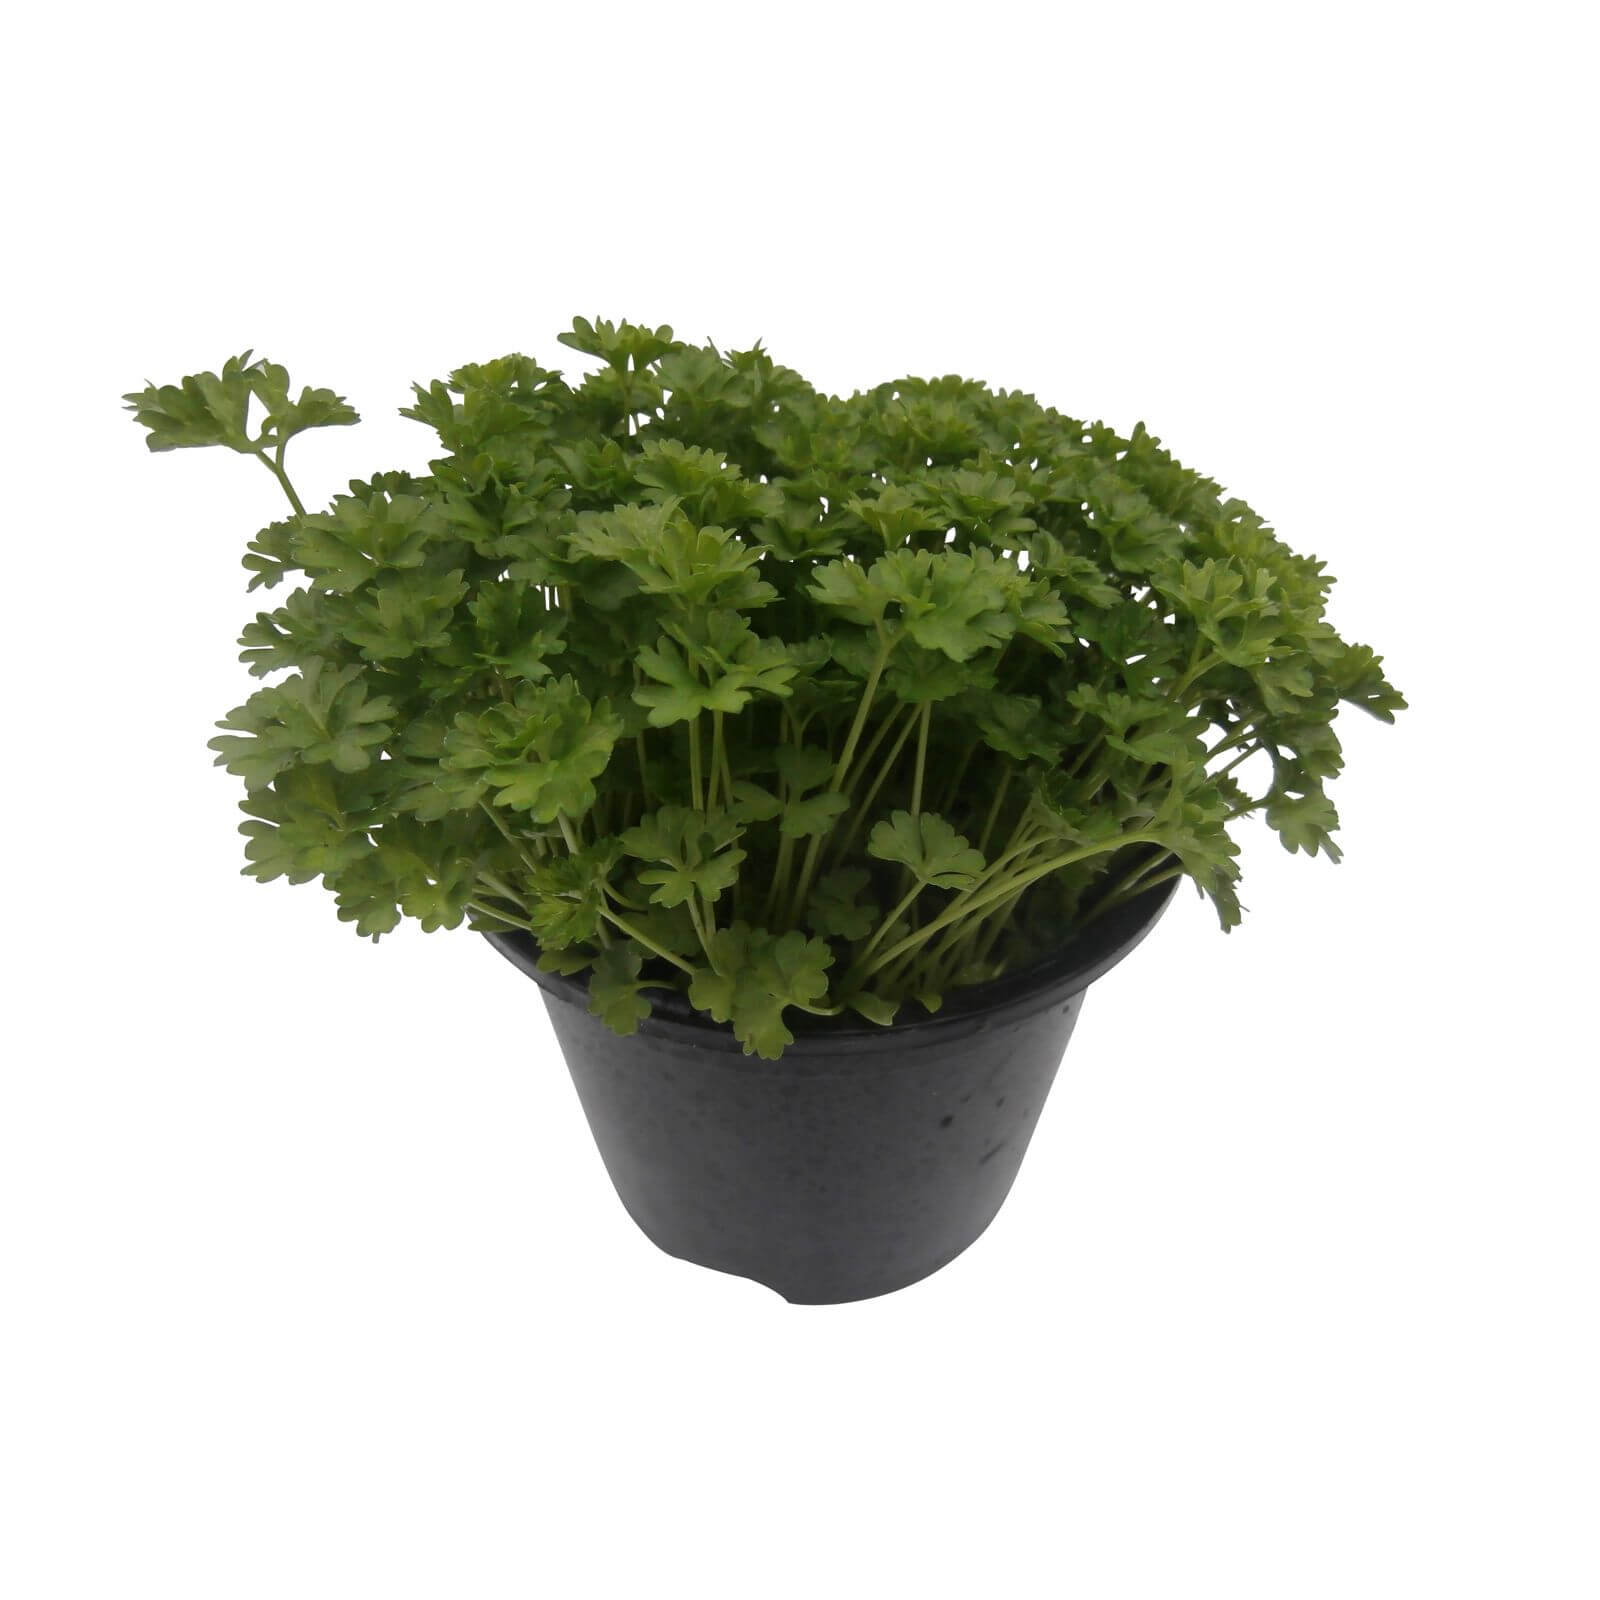 Curled Parsley - 1L